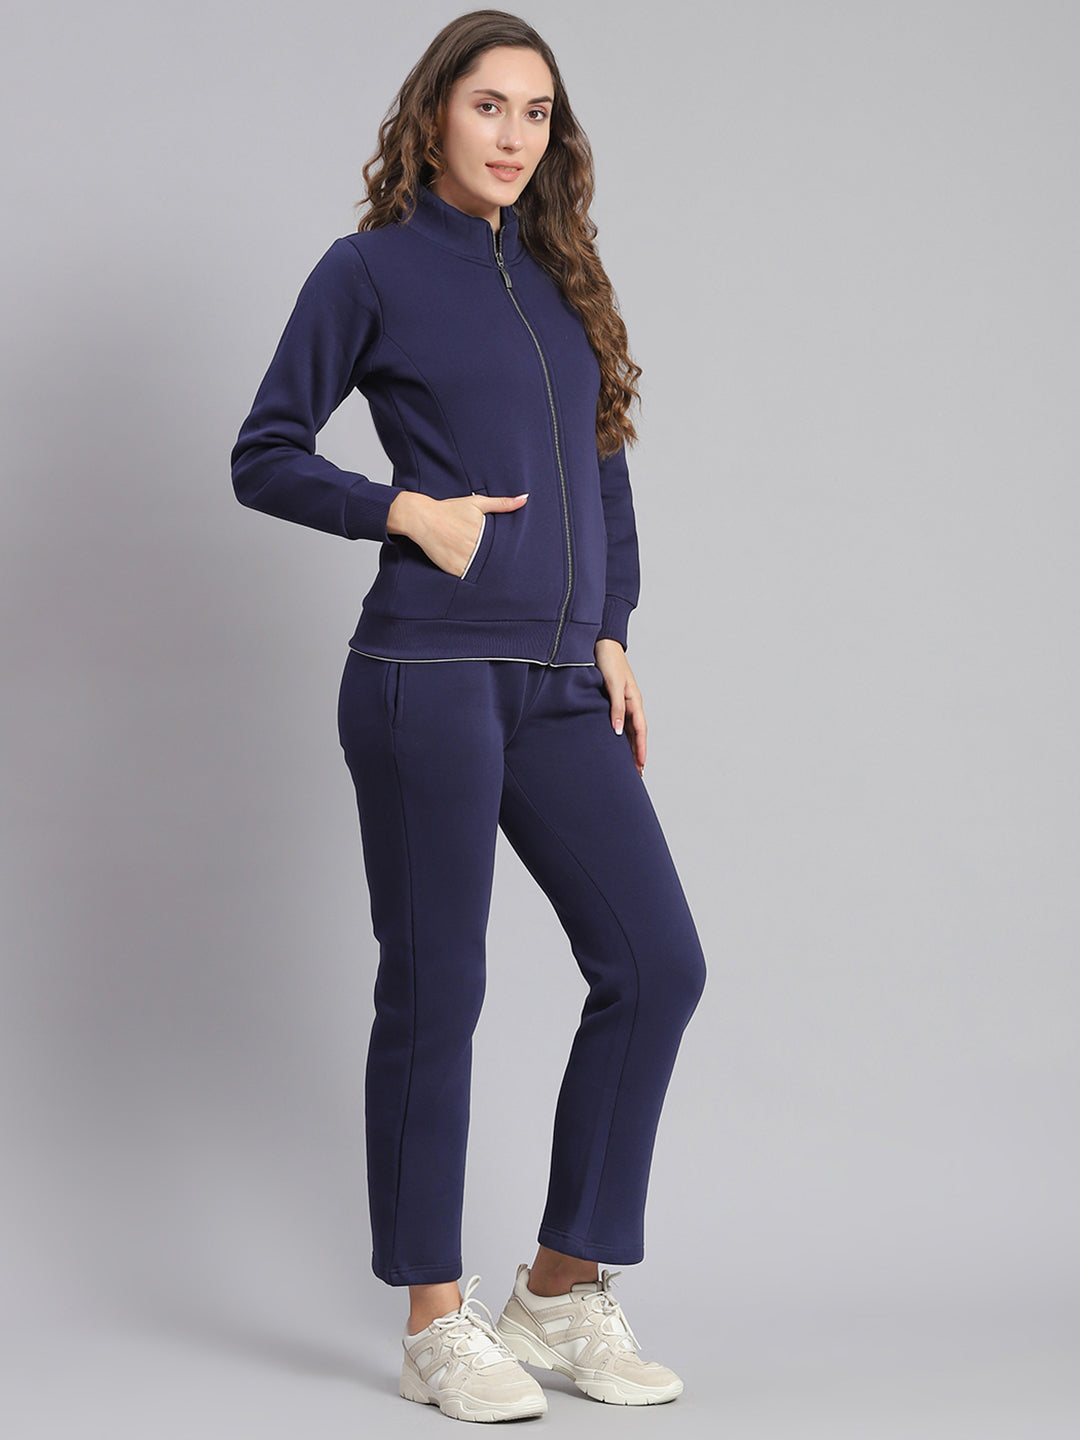 Women Purple Solid Stand Collar Full Sleeve Tracksuits